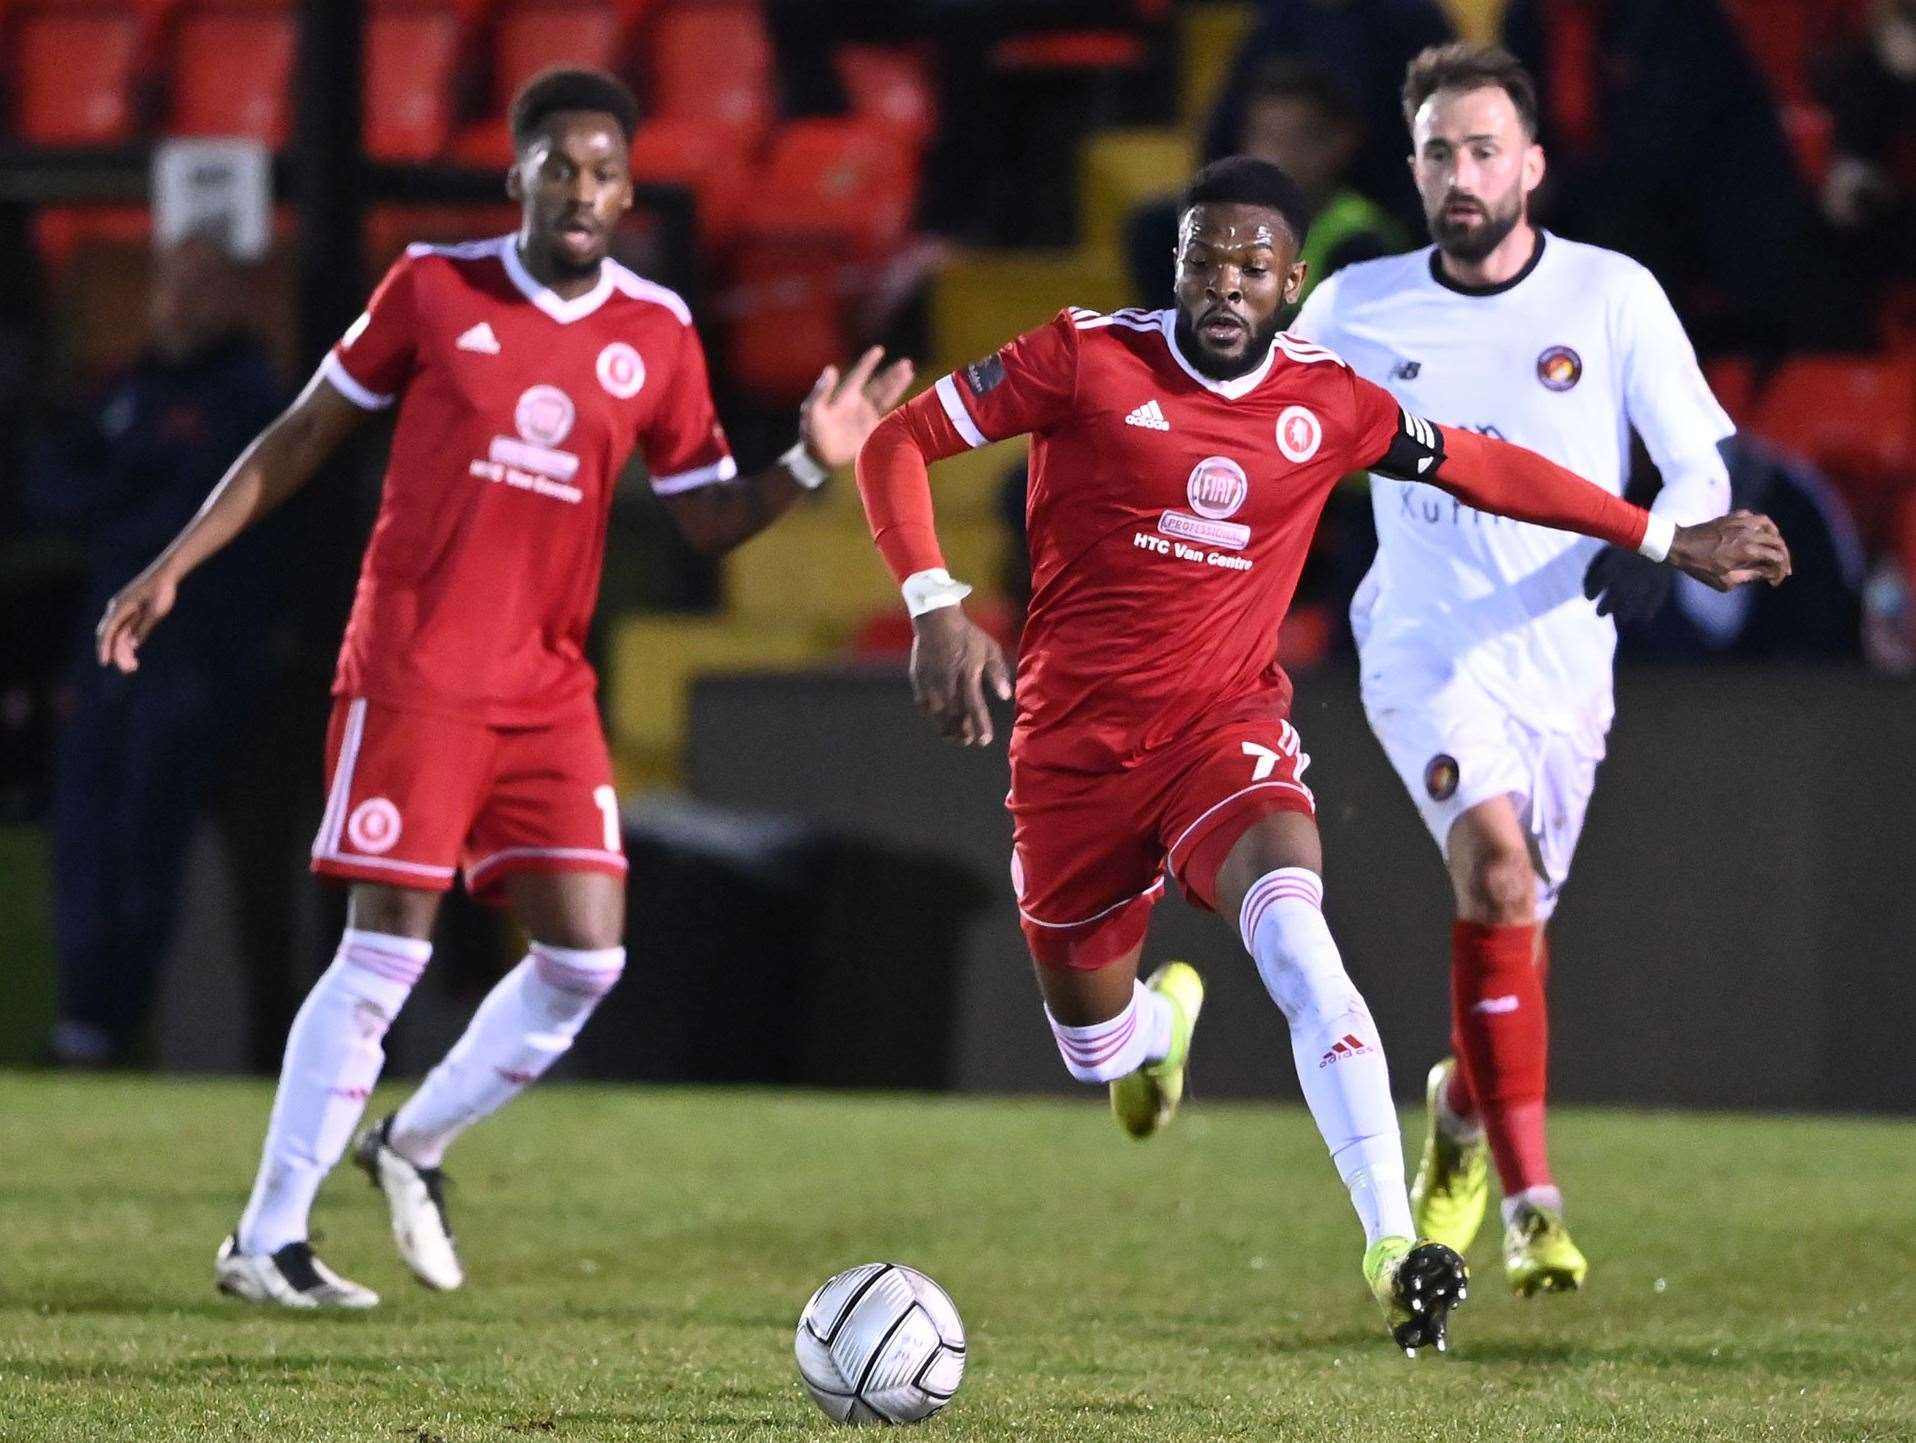 Welling skipper Anthony Cook on the attack against Ebbsfleet. Picture: Keith Gillard